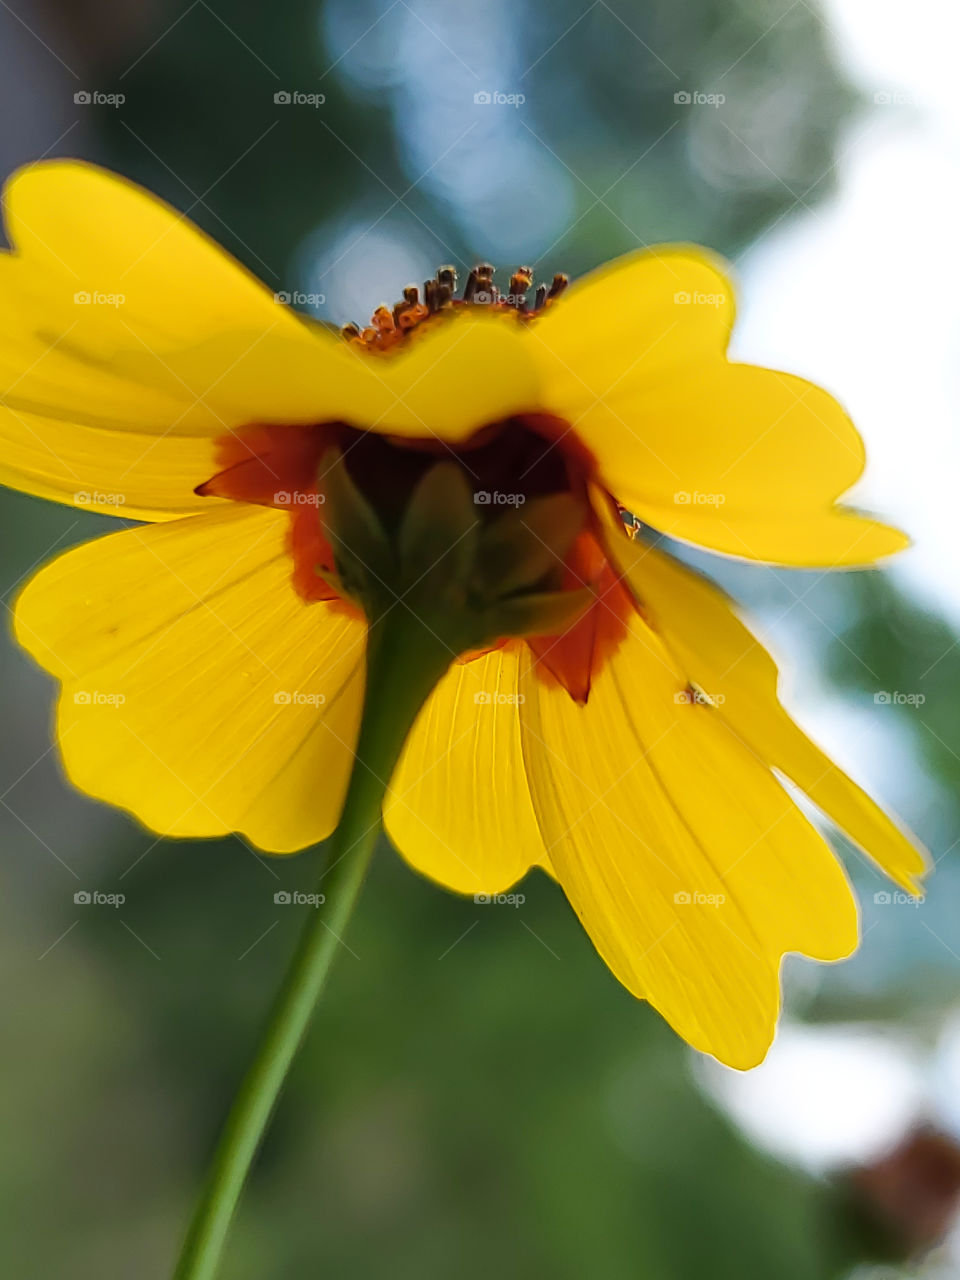 The beauty of a wild and colorful coreopsis flower from the perspective from the ground up. Imagine this perspective as what an insect like an ant or a caterpillar sees before climbing up it's stem.